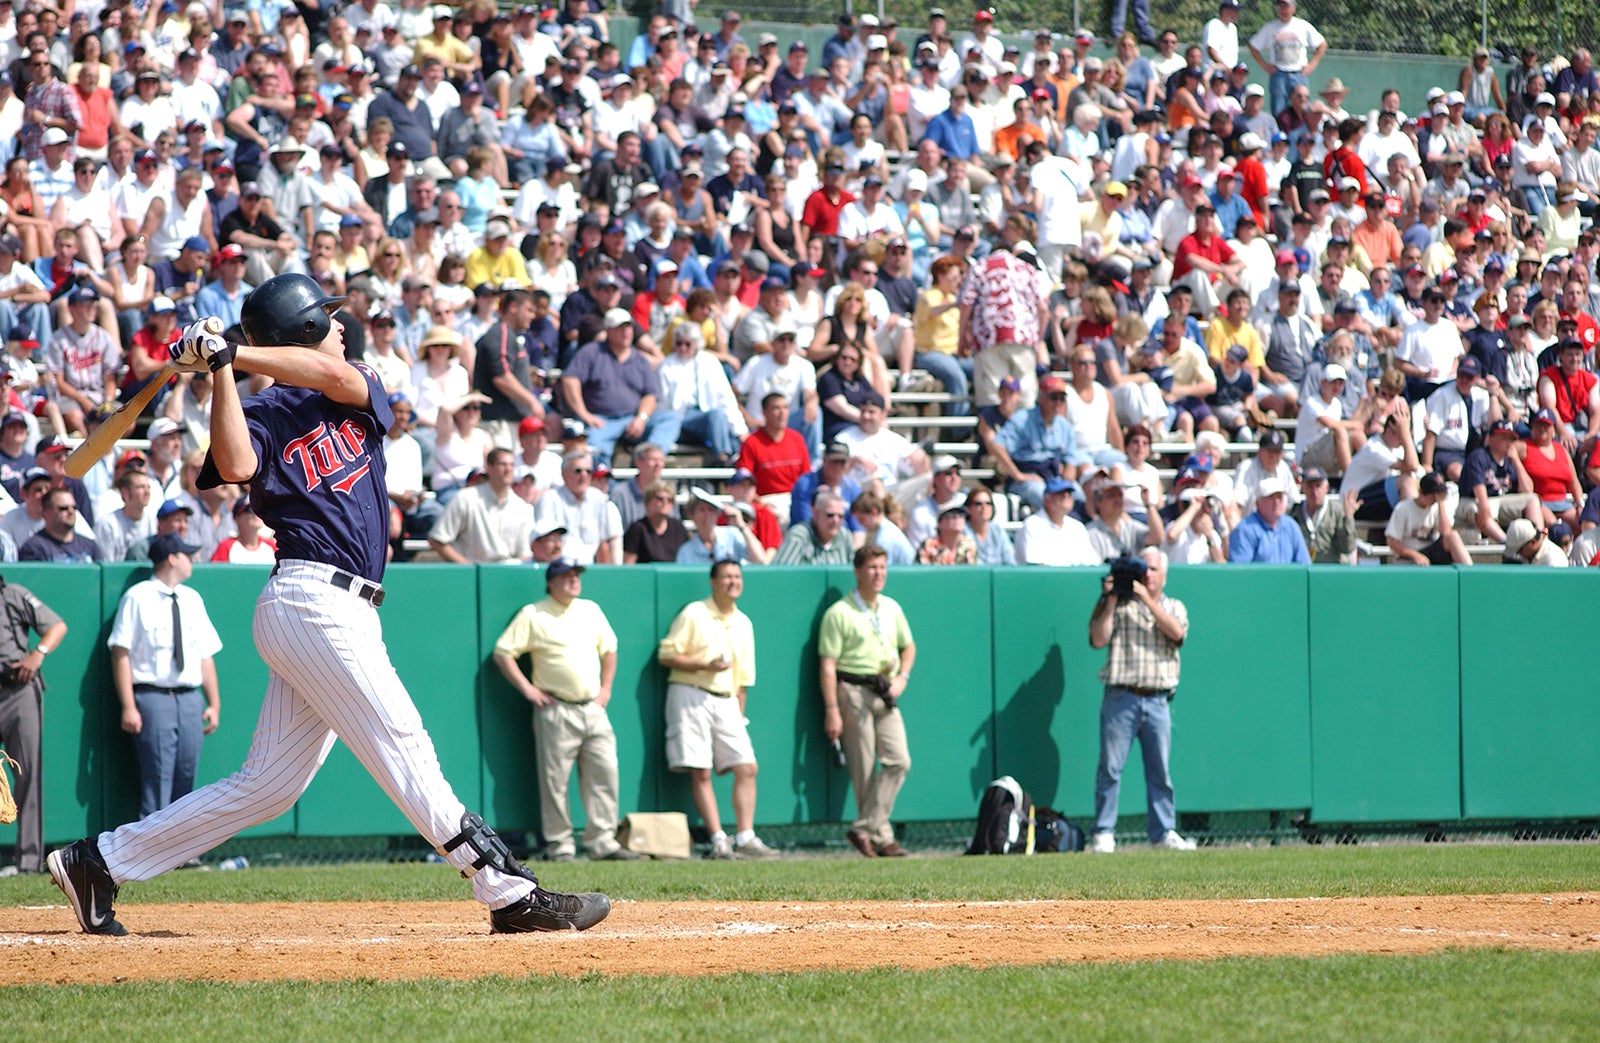 Joe Mauer in left-handed swing at 2004 Hall of Fame Game